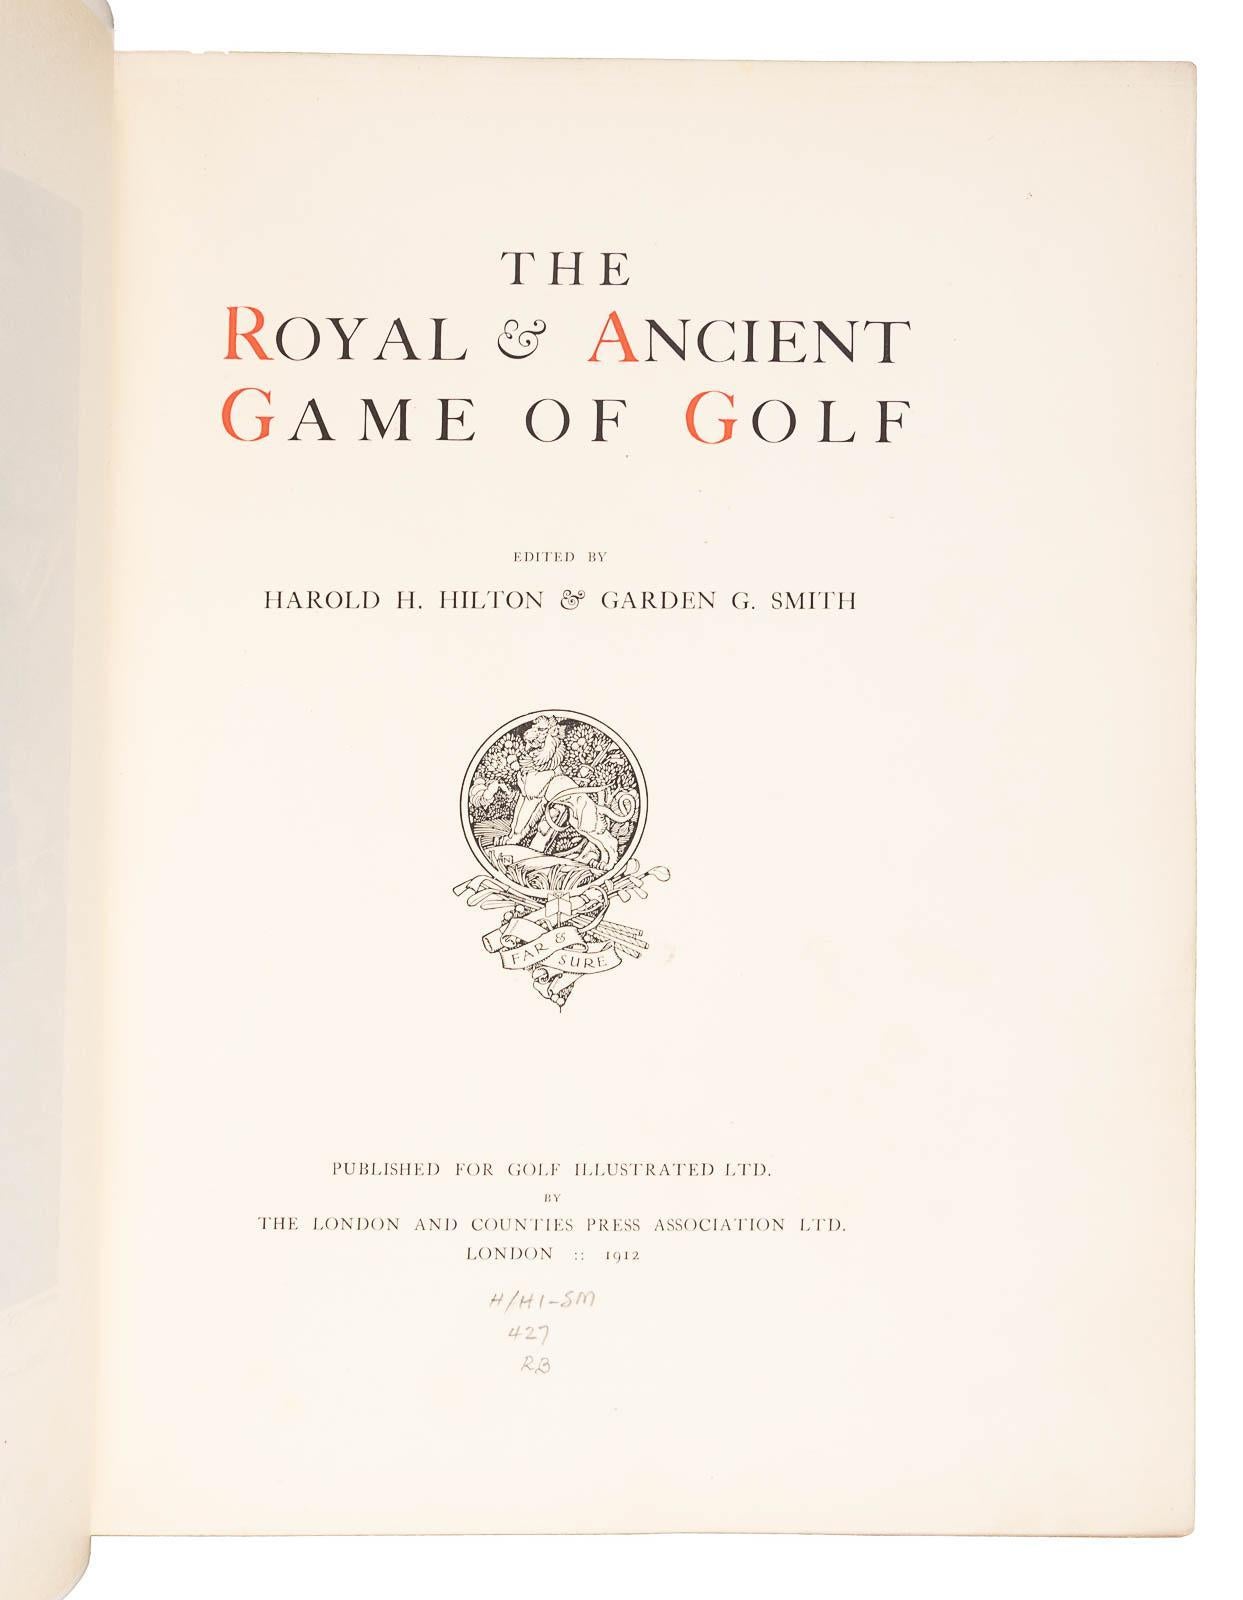 Edited by Harold H. Hilton and Garden G. Smith. The Royal and Ancient Game of Golf. London: London and Counties Press Association, Ltd., 1912. First Subscriber’s Limited Edition. Number 237 or a total 900. Published for Golf Illustrated Ltd. Rebound